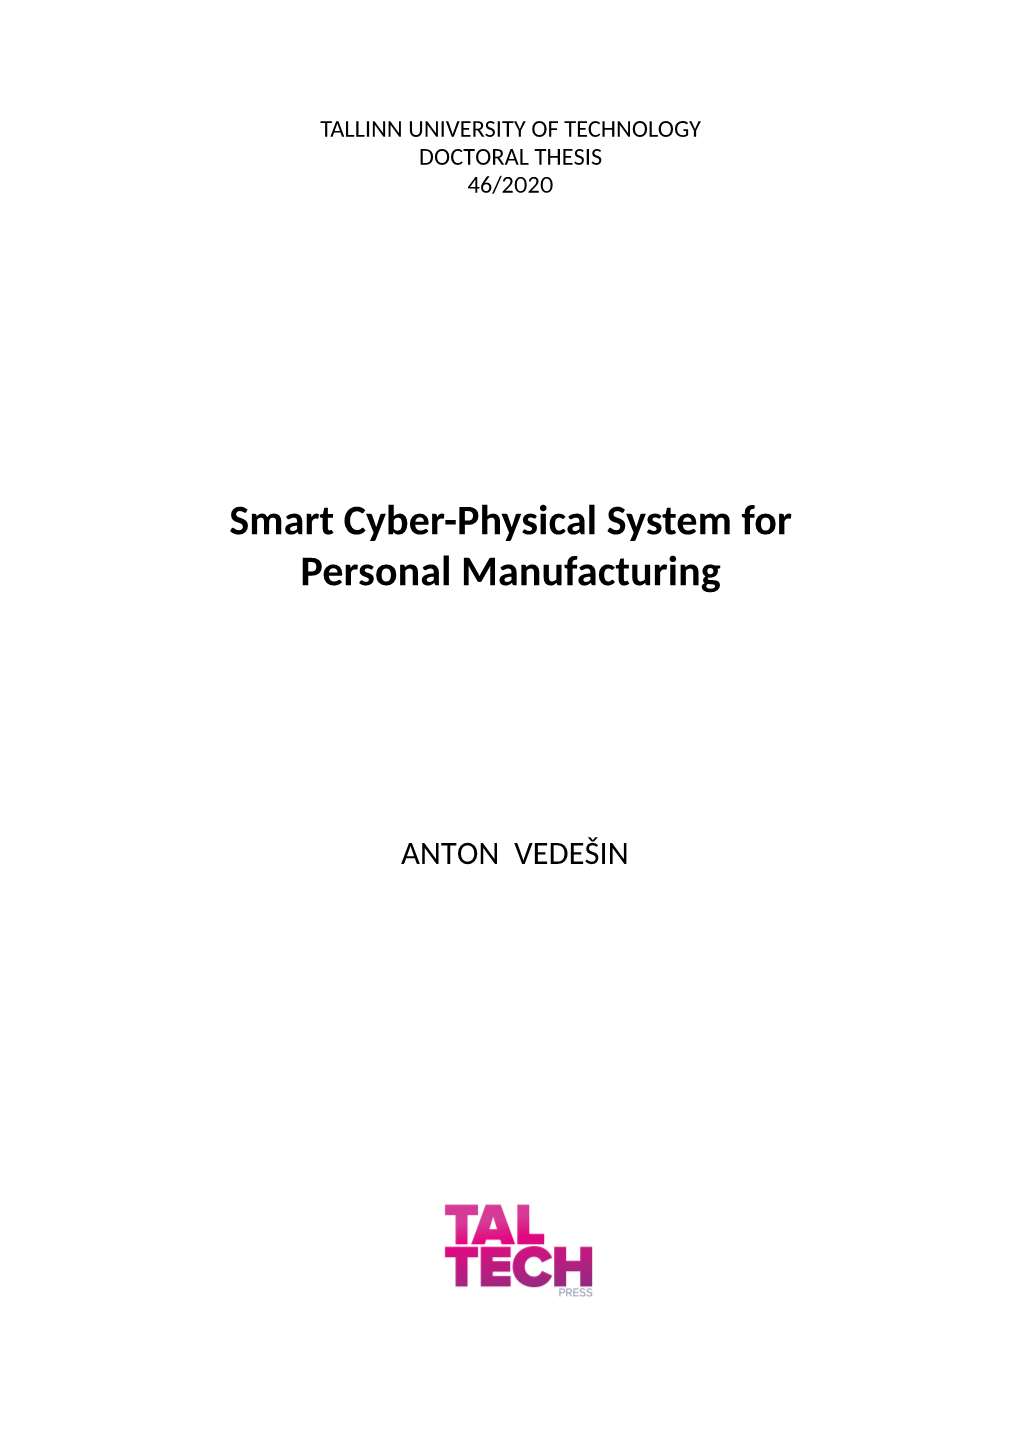 Smart Cyber-Physical System for Personal Manufacturing